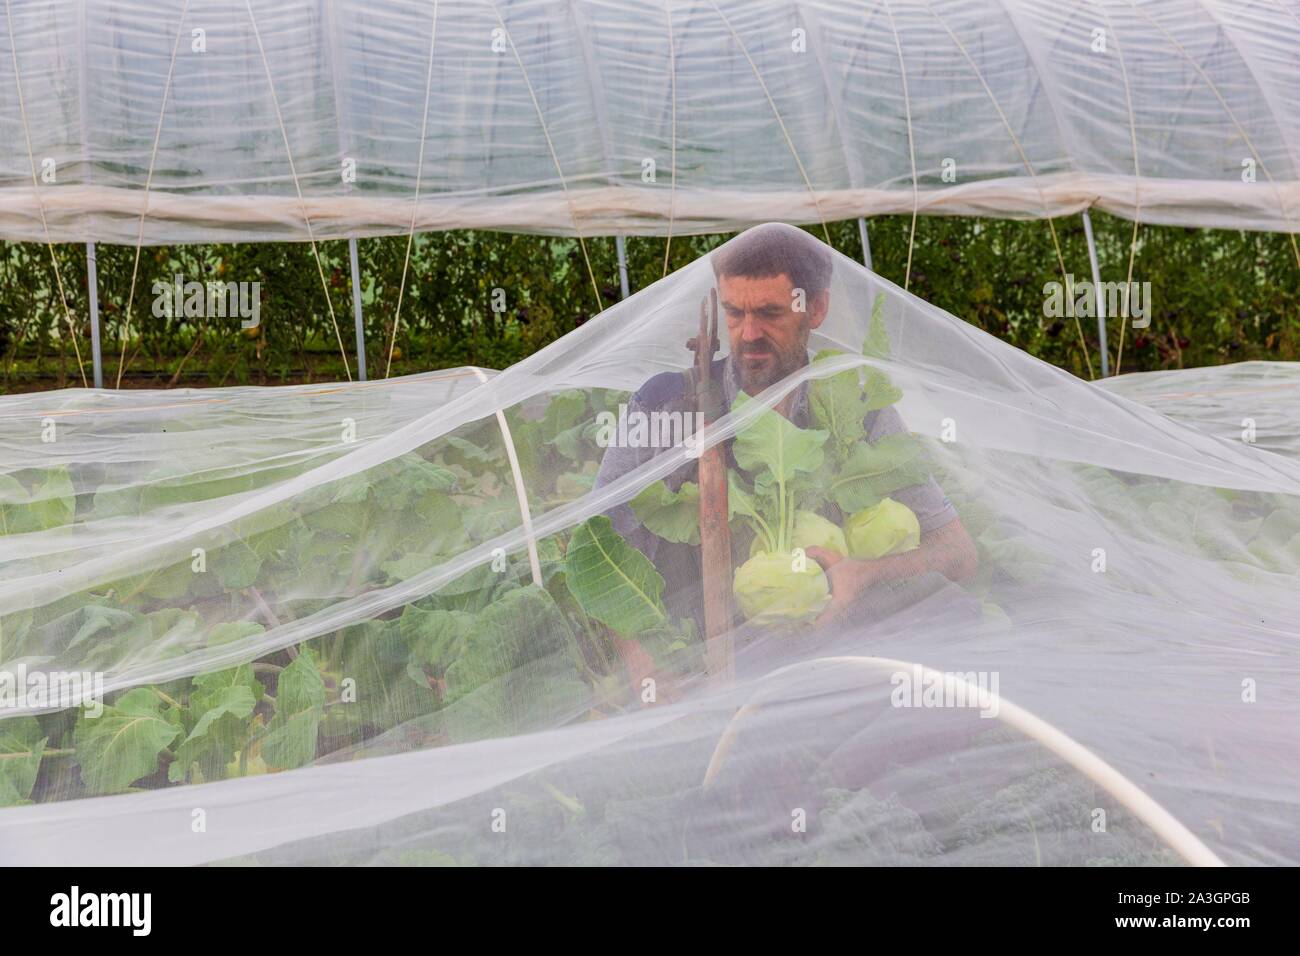 Sweden, County of Vastra Gotaland, Hokerum, Ulricehamn hamlet, Rochat family report, Pierre harvesting kohlrabi under the veil of protection, everything is fine because it is not wet Stock Photo